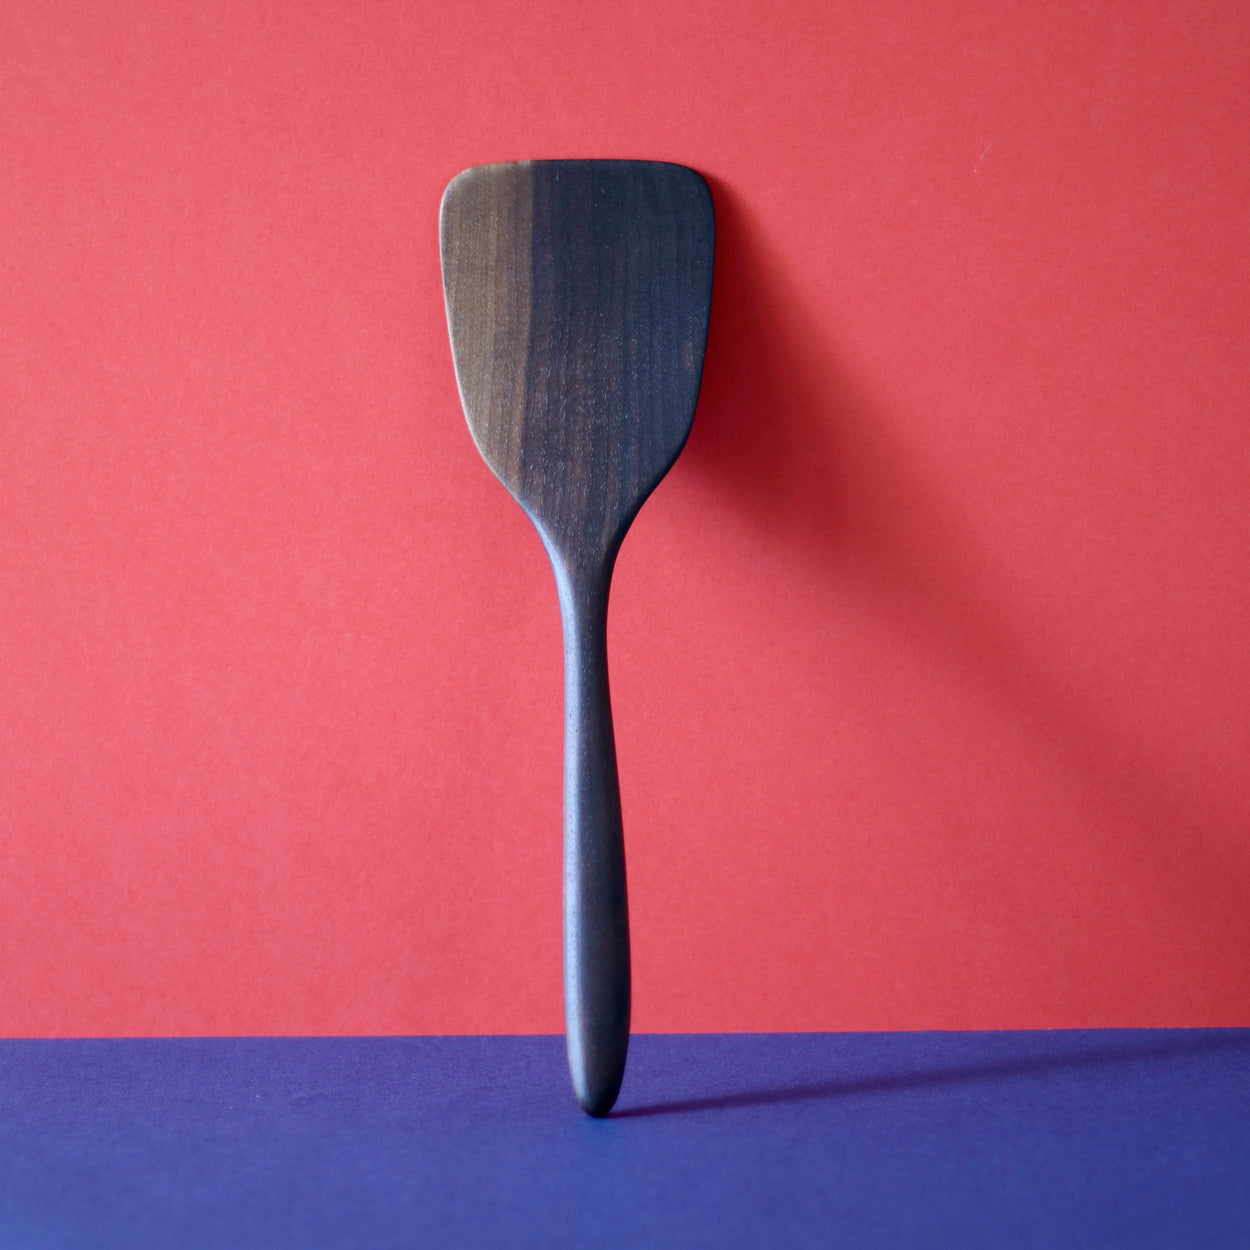 Handmade Walnut Wood Spatula upright with red and blue background. By Civil Dawn Studio.